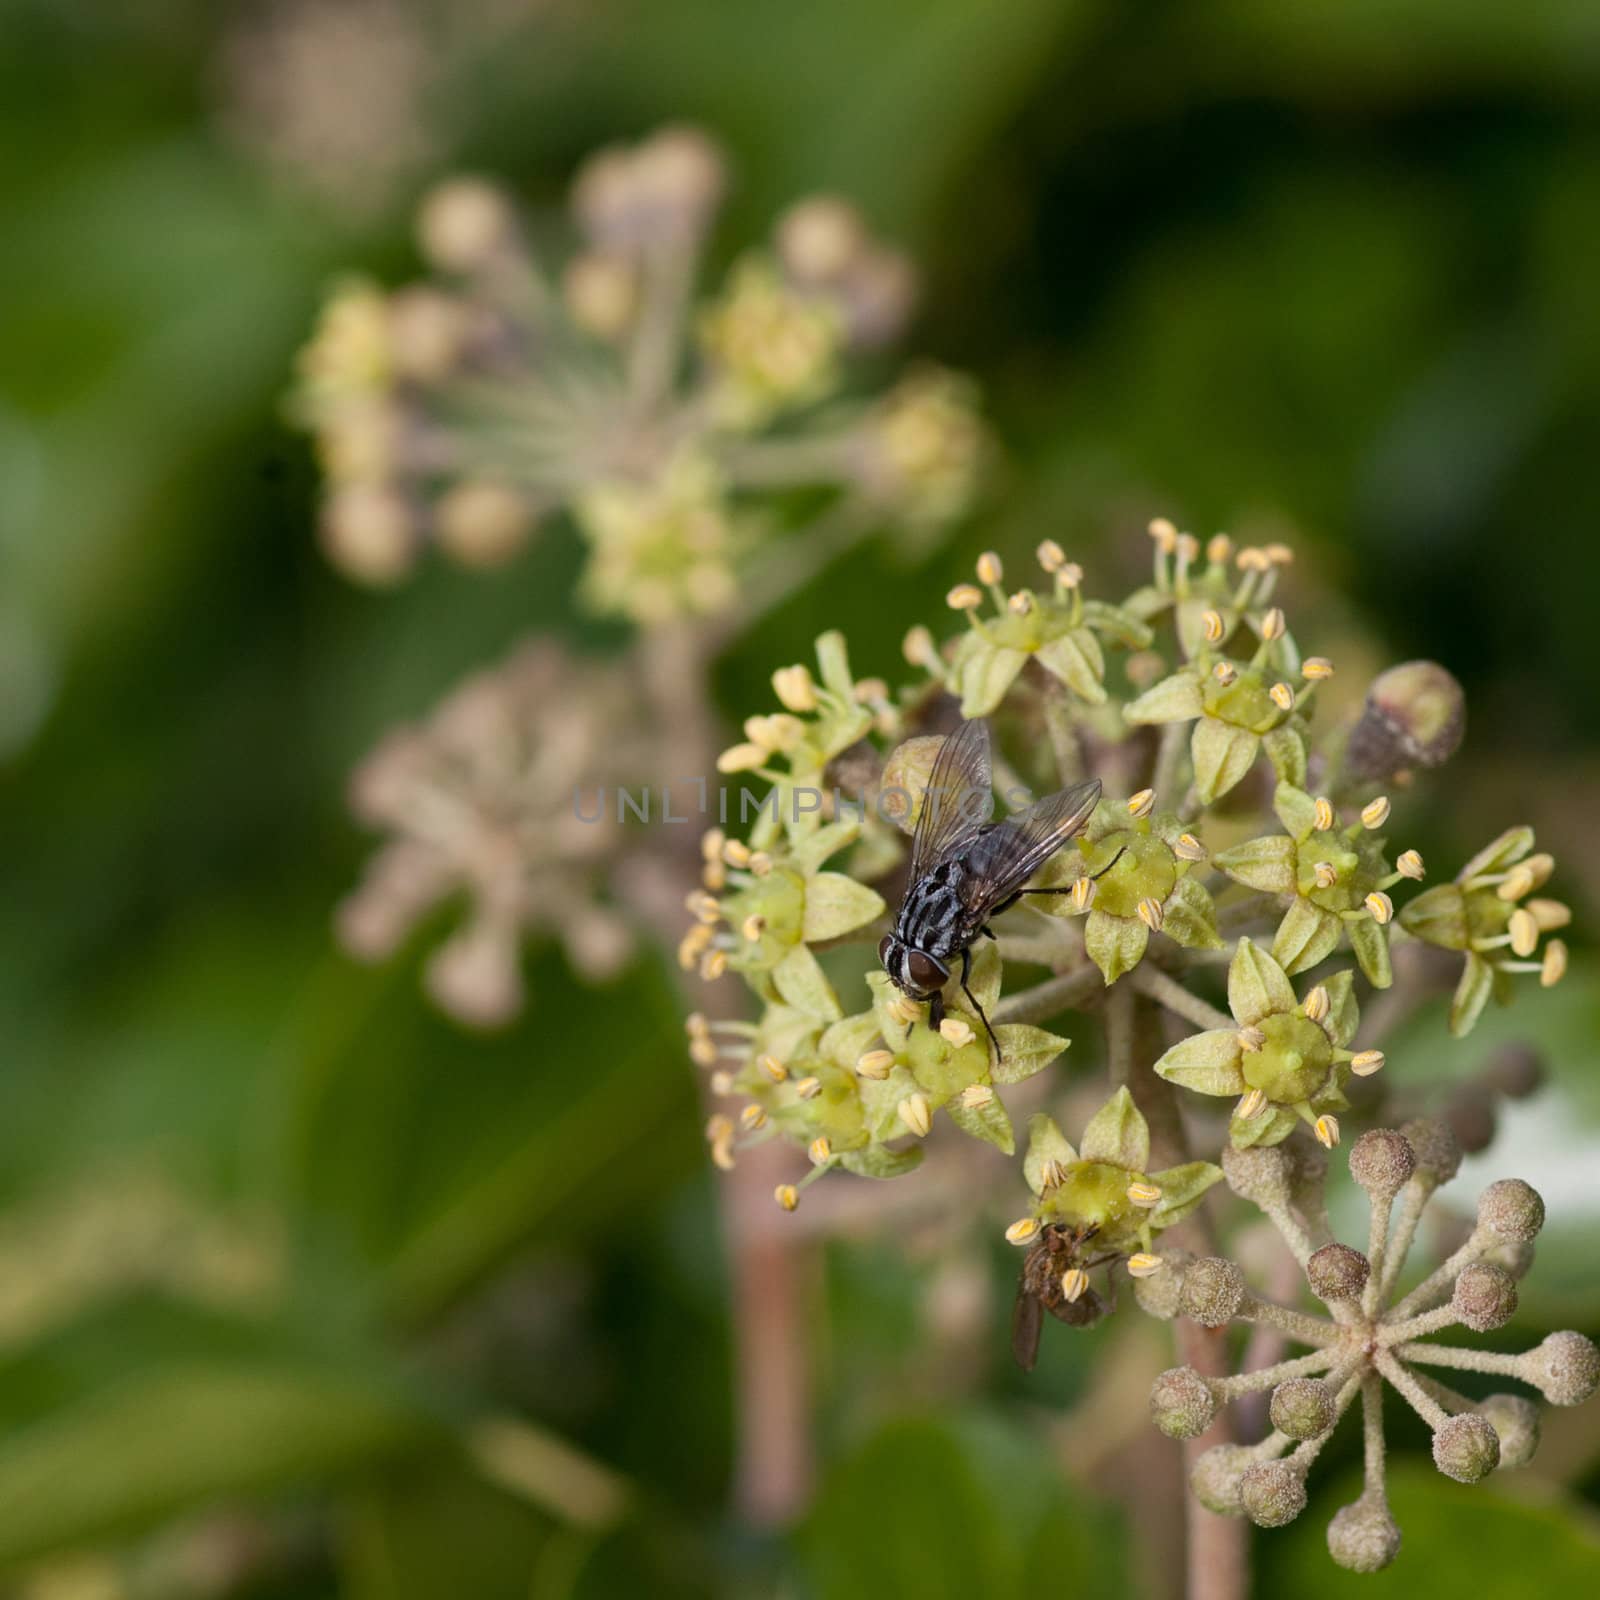 Fly sucking nectar from Common Ivy (Hedera helix) flowers.